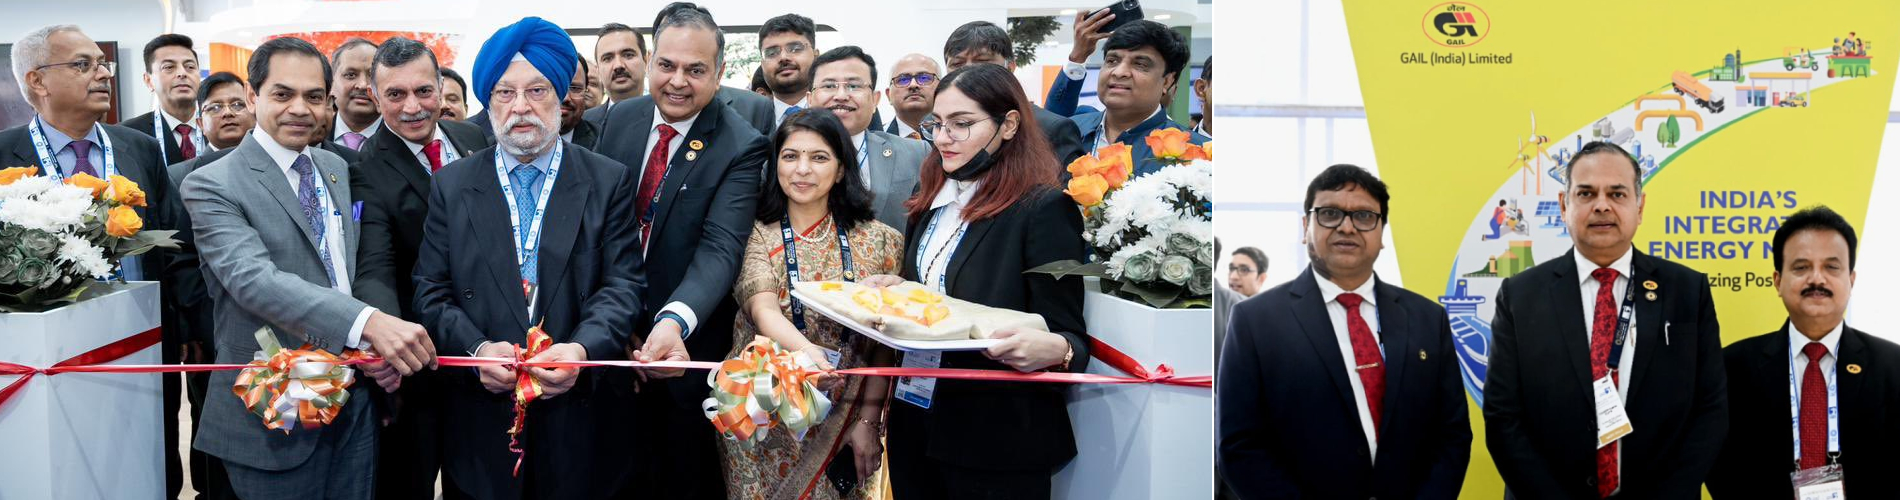 Hon'ble Minister of Petroleum and Natural Gas inaugurated the India Pavilion at #ADIPEC2022 in Abu Dhabi. GAIL was part of the India Pavilion